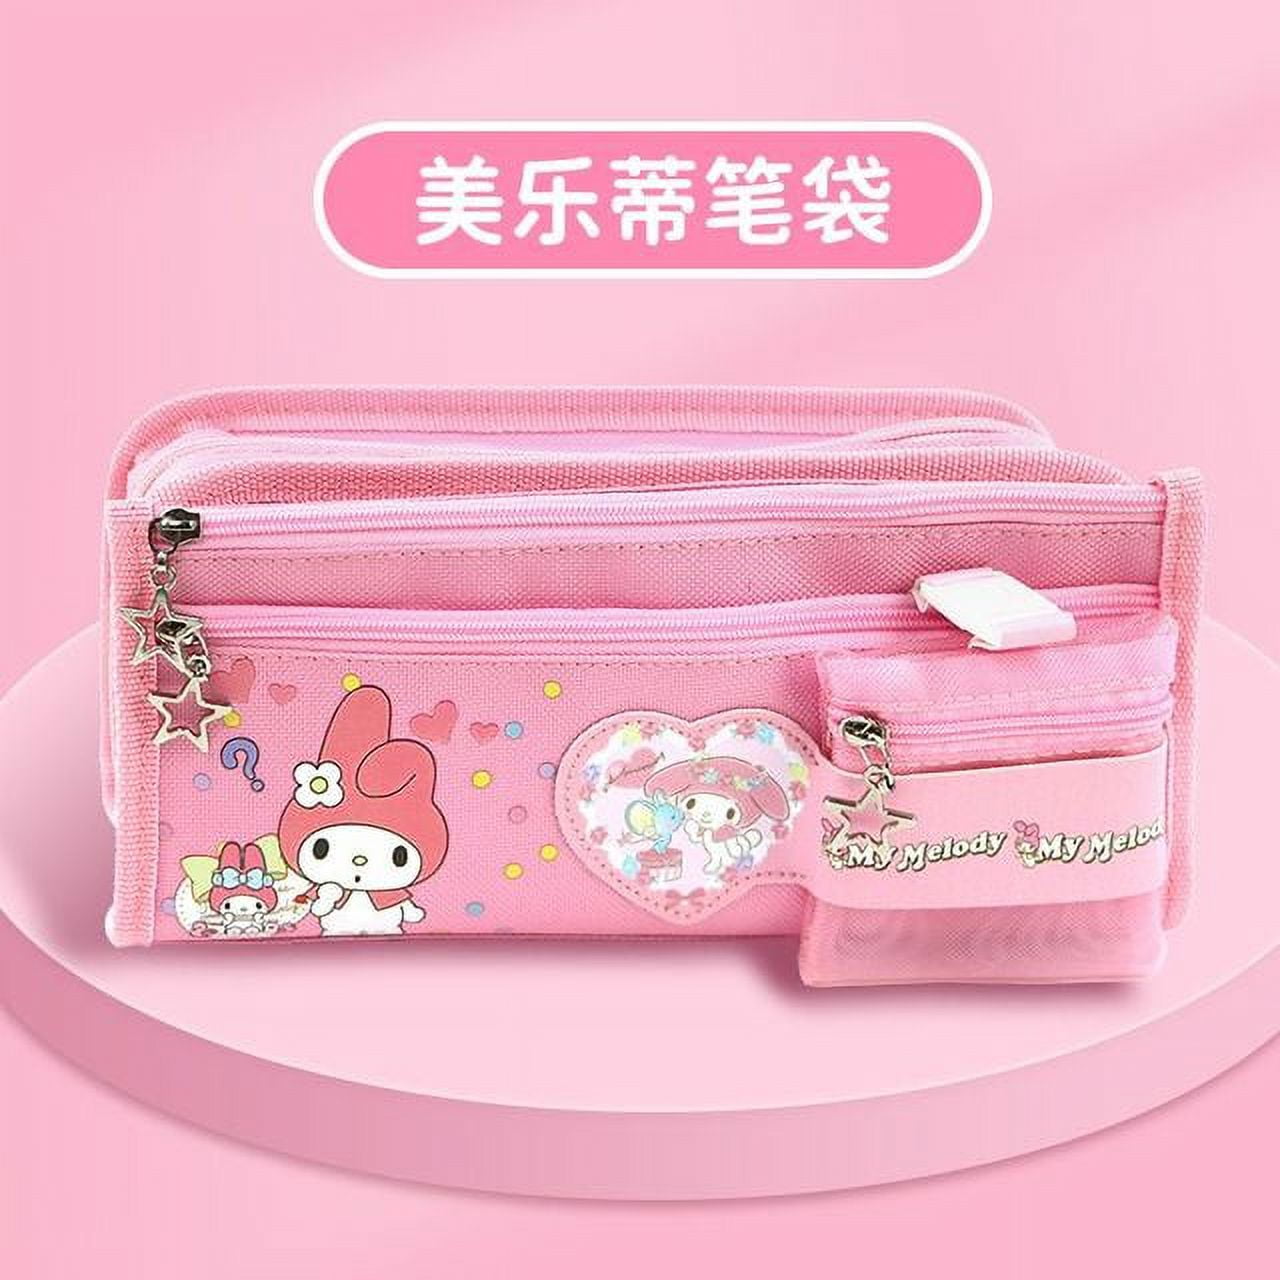 Pencil Case Sanrio Anime Cartoon Series Cinnamoroll Mymelody Kuromi Cute  Fashion Large Capacity Pen Pouch Stationery Case Gifts 